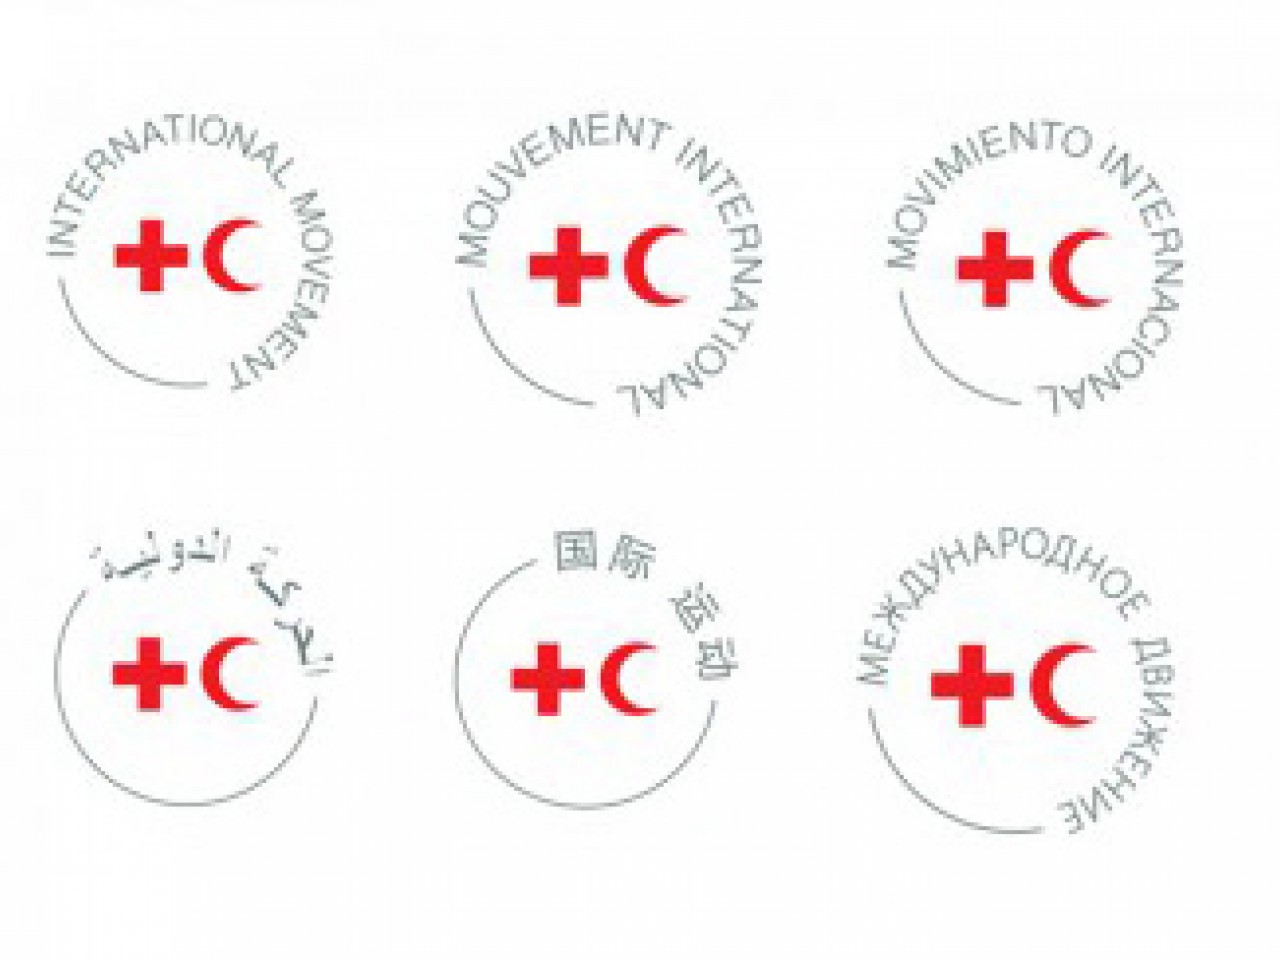 A Logo For The International Red Cross And Red Crescent Movement International Committee Of The Red Cross